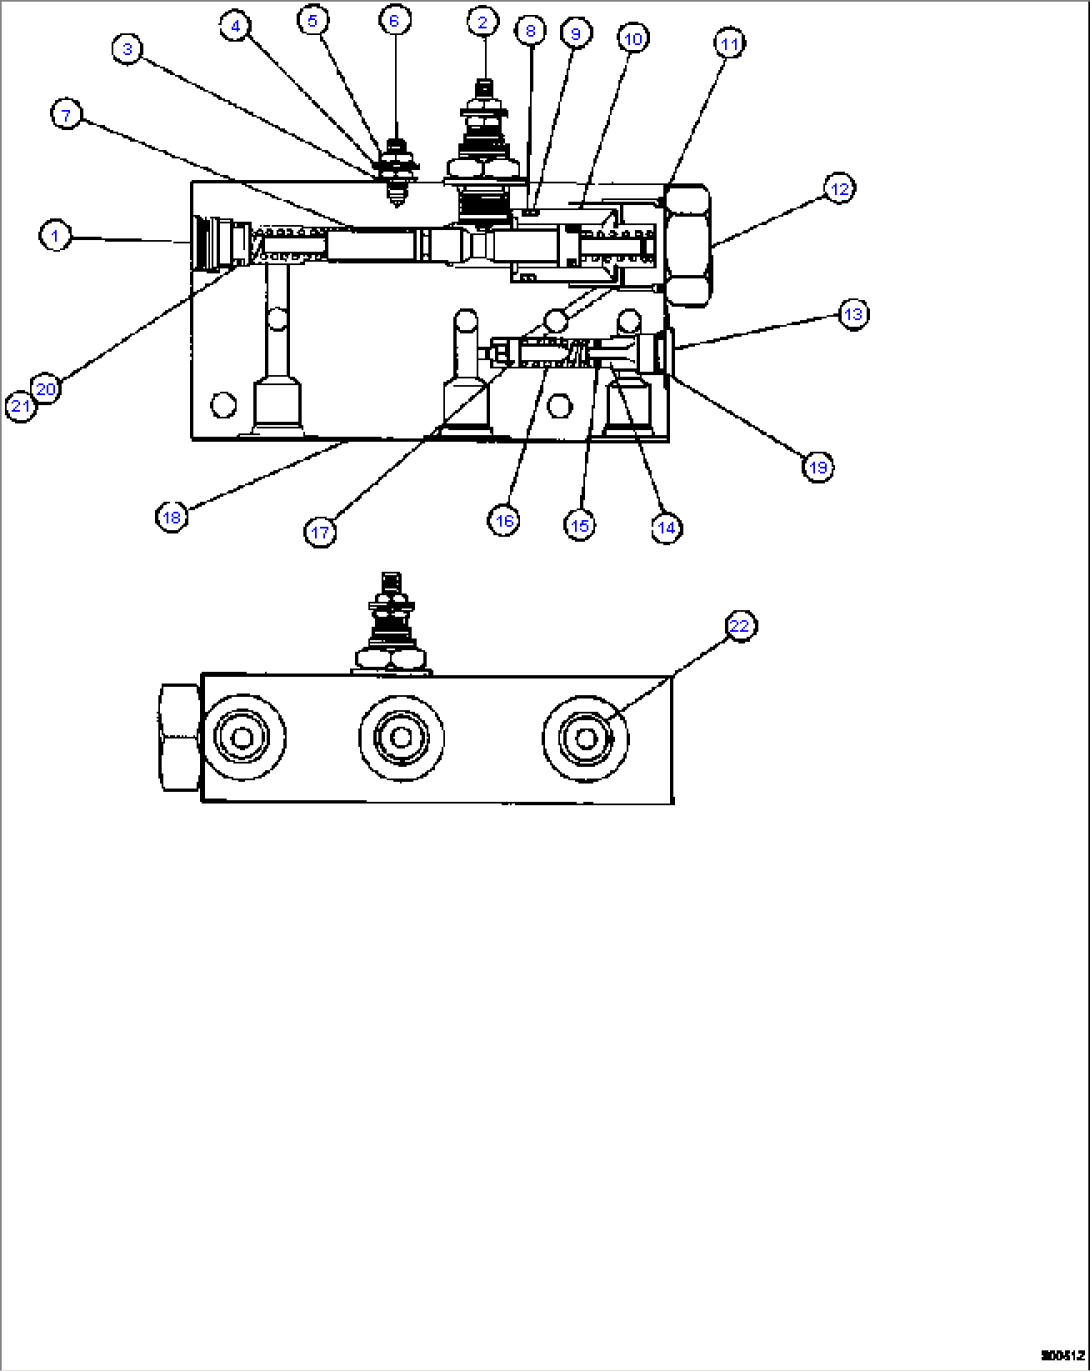 DIFFERENTIAL MANIFOLD VALVE ASSEMBLY PB5567